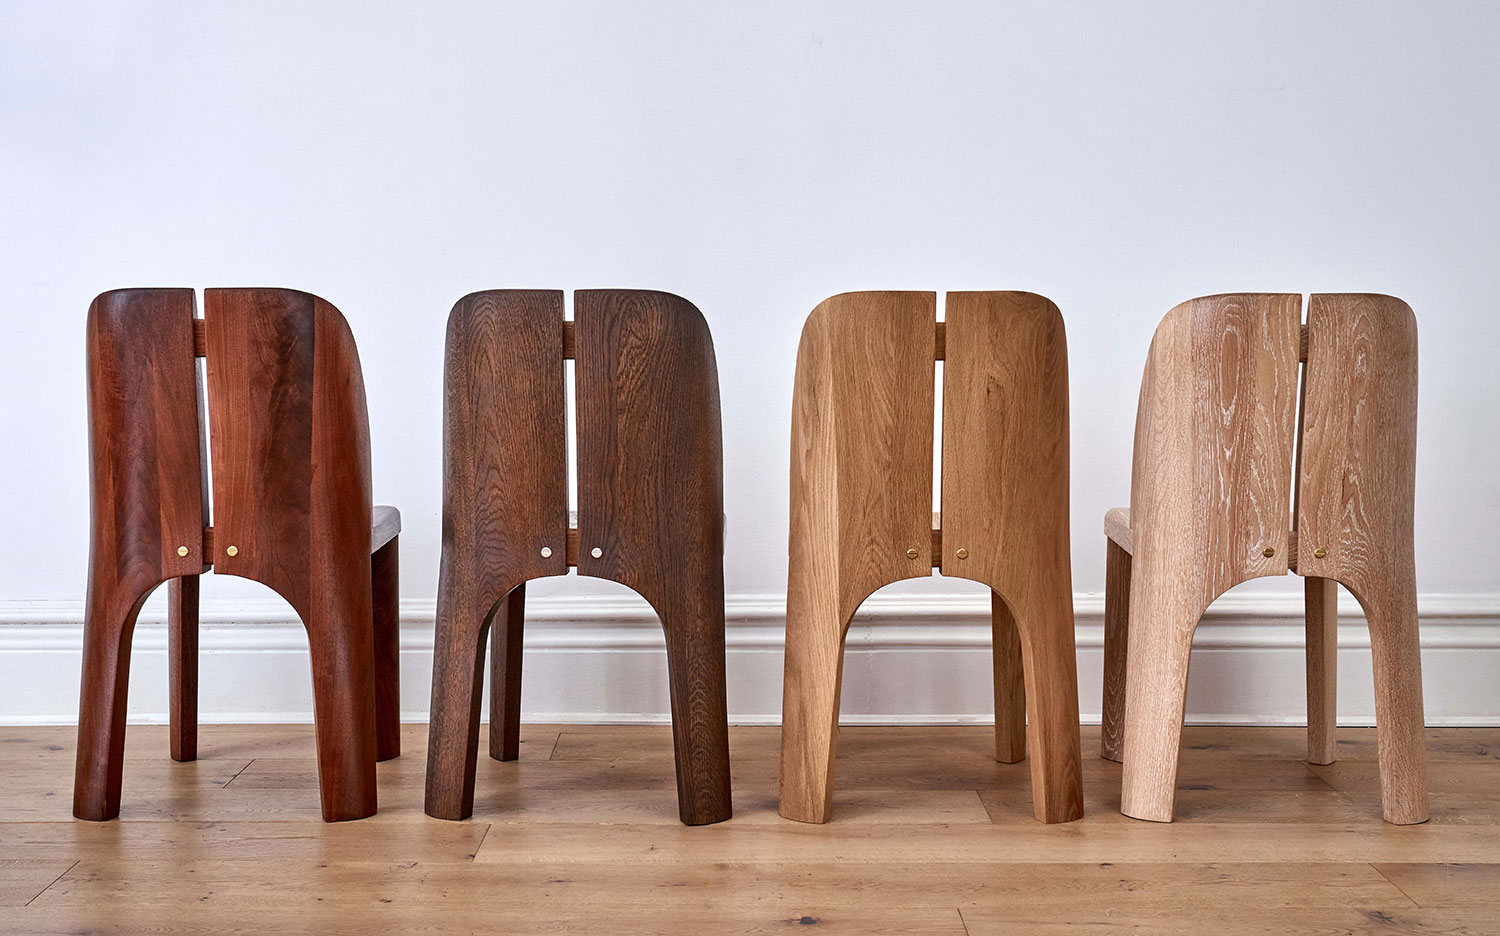 Shades of the Ovo chairs